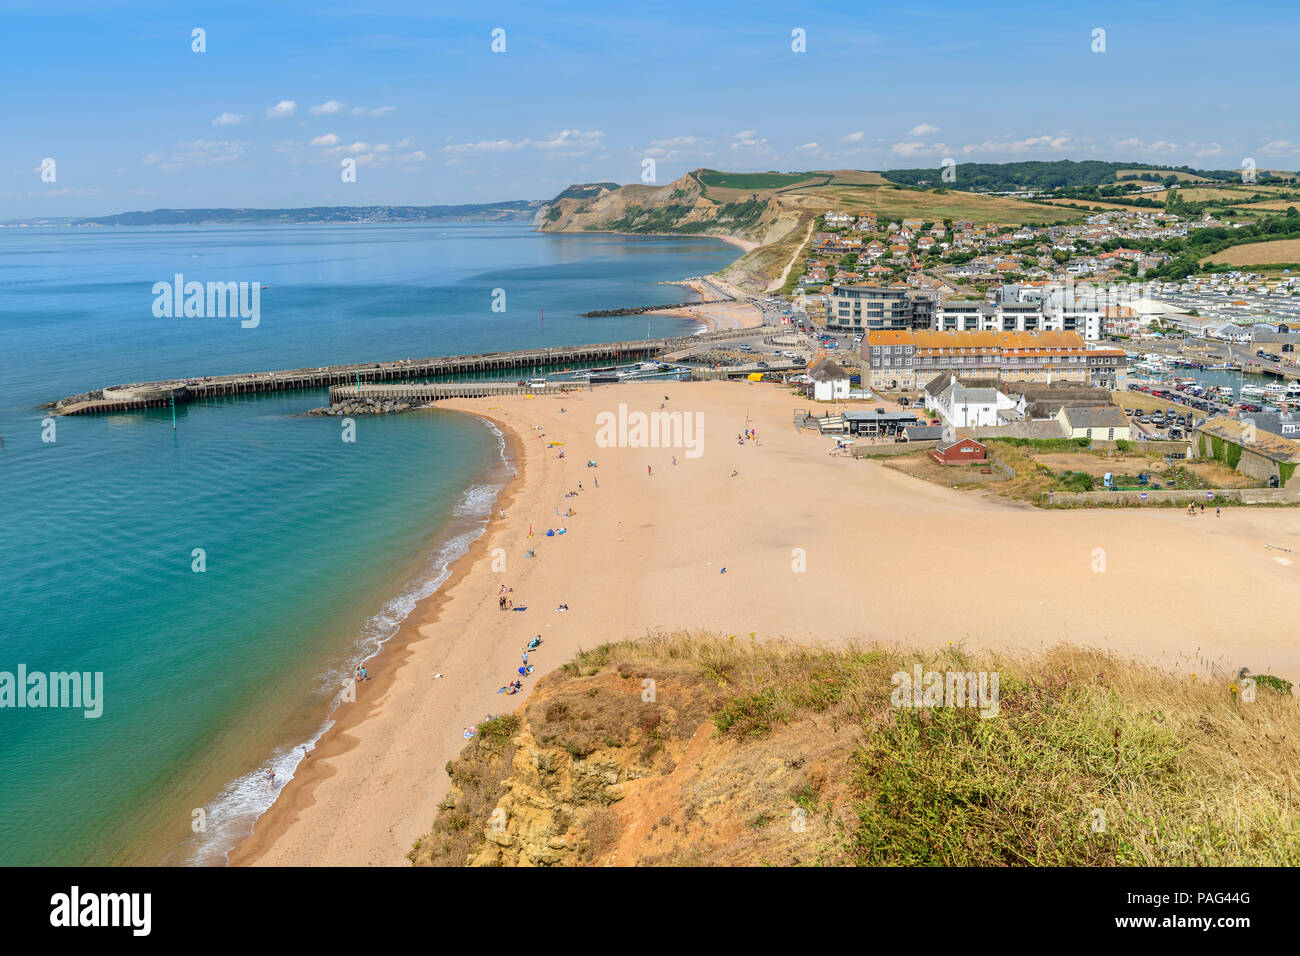 A view of West Bay in Dorset, taken from the nearby cliff made famous by the television series 'Broadchurch'. Stock Photo